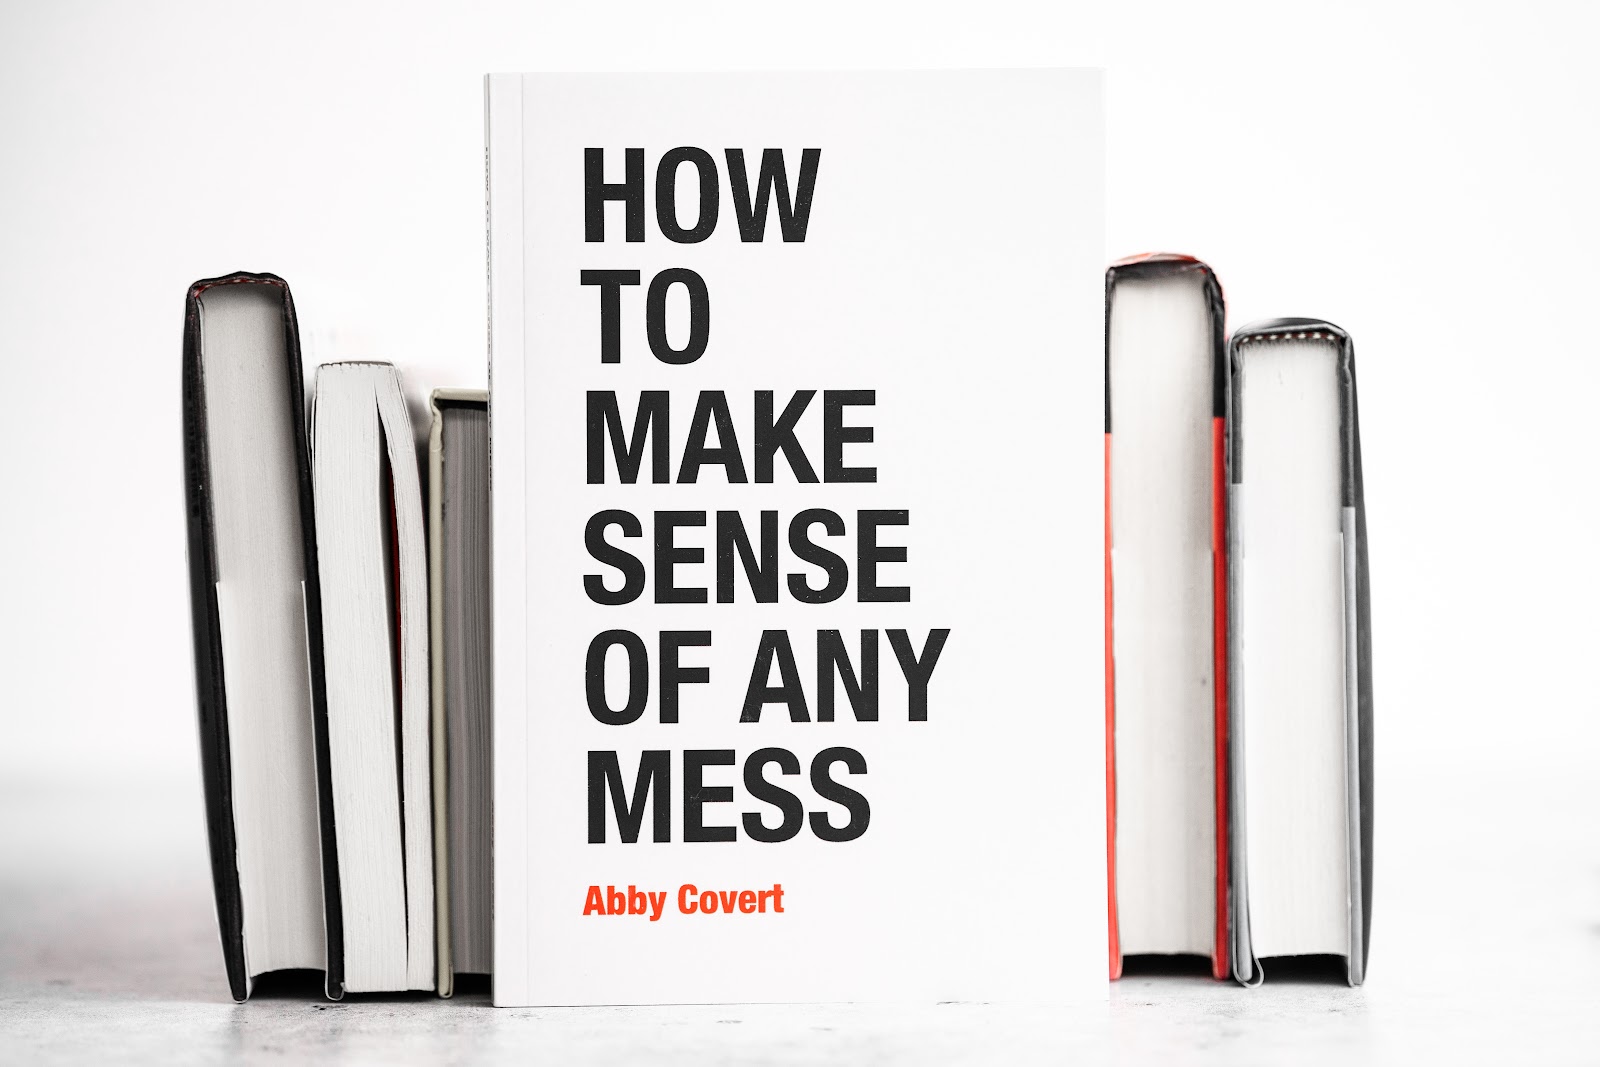 How to make sense of any mess book with other books behind